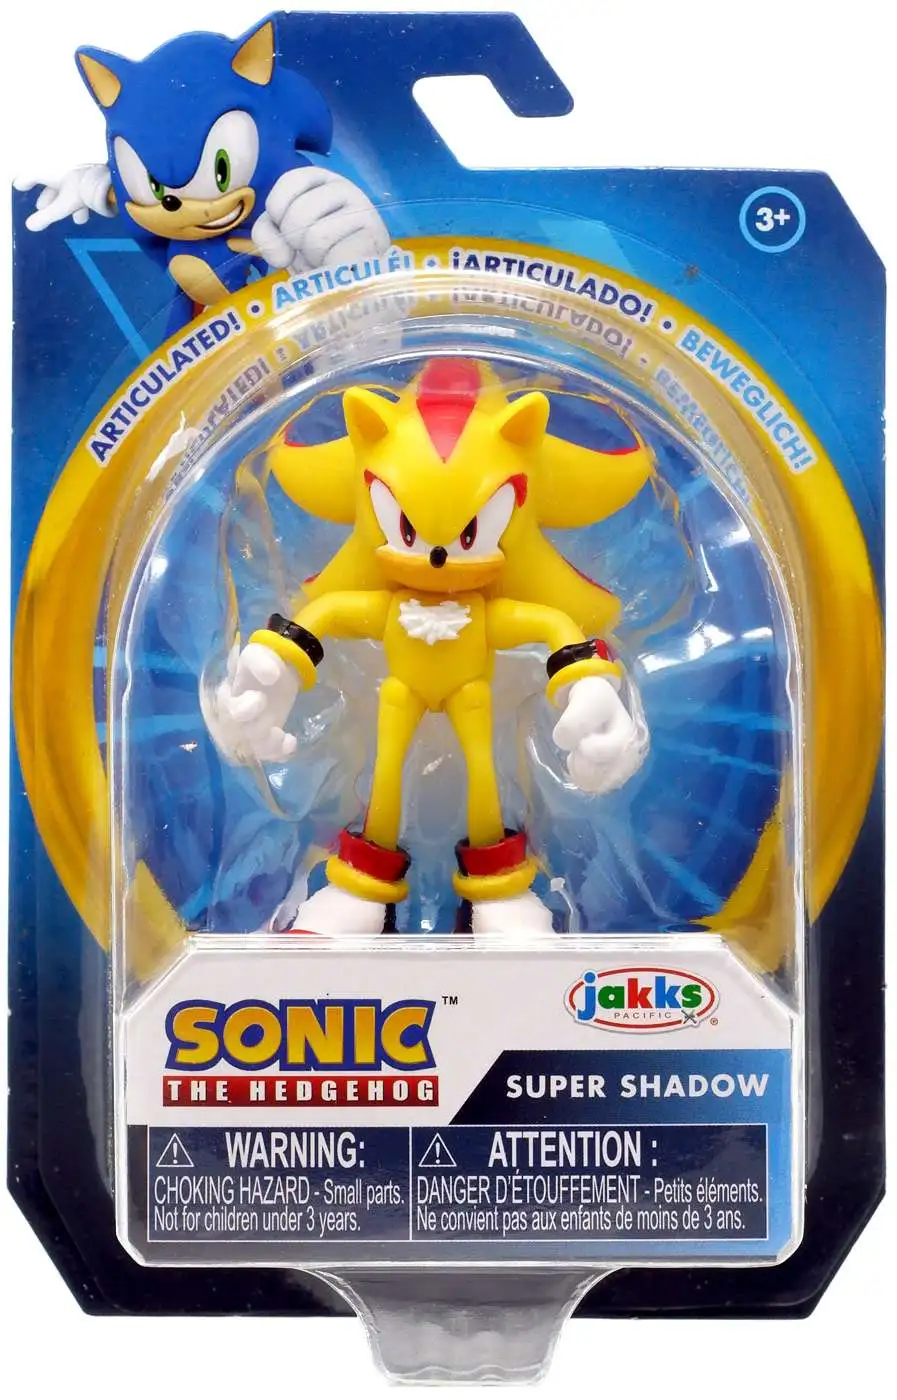 Sonic the Hedgehog 2, 4 inch Articulated Super Sonic with Master Emera –  GOODIES FOR KIDDIES